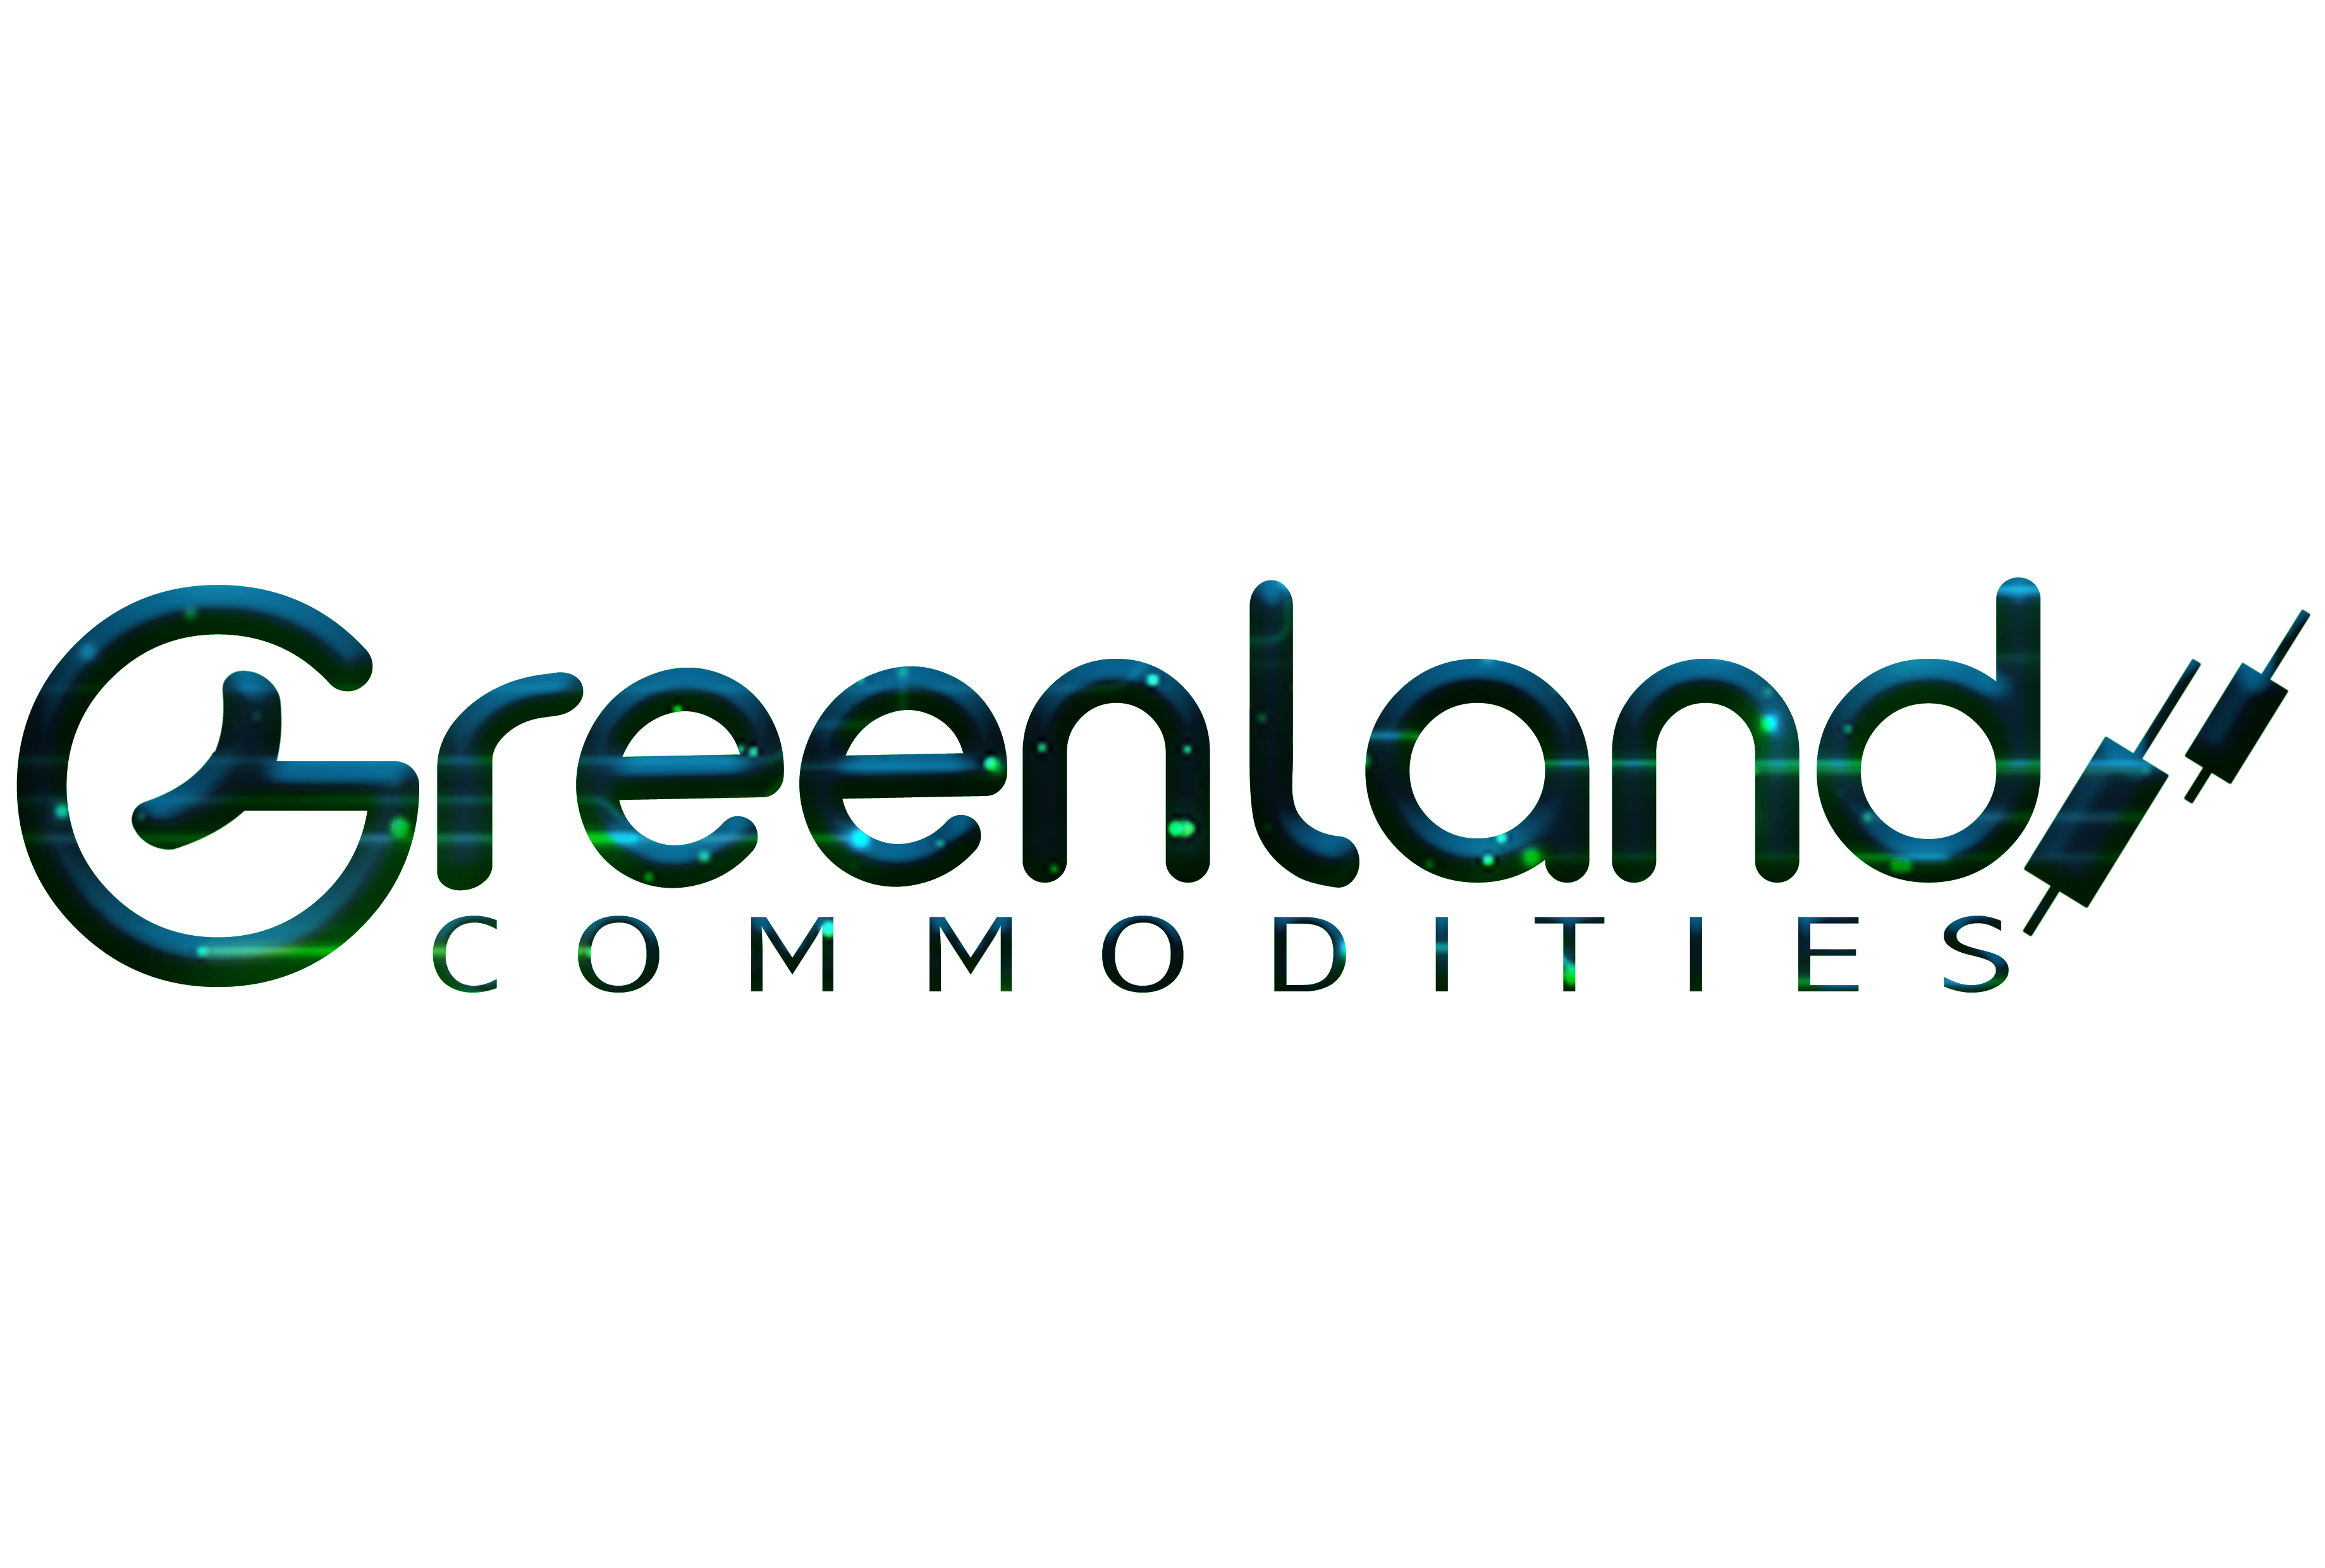 Greenland Commodities s.r.o